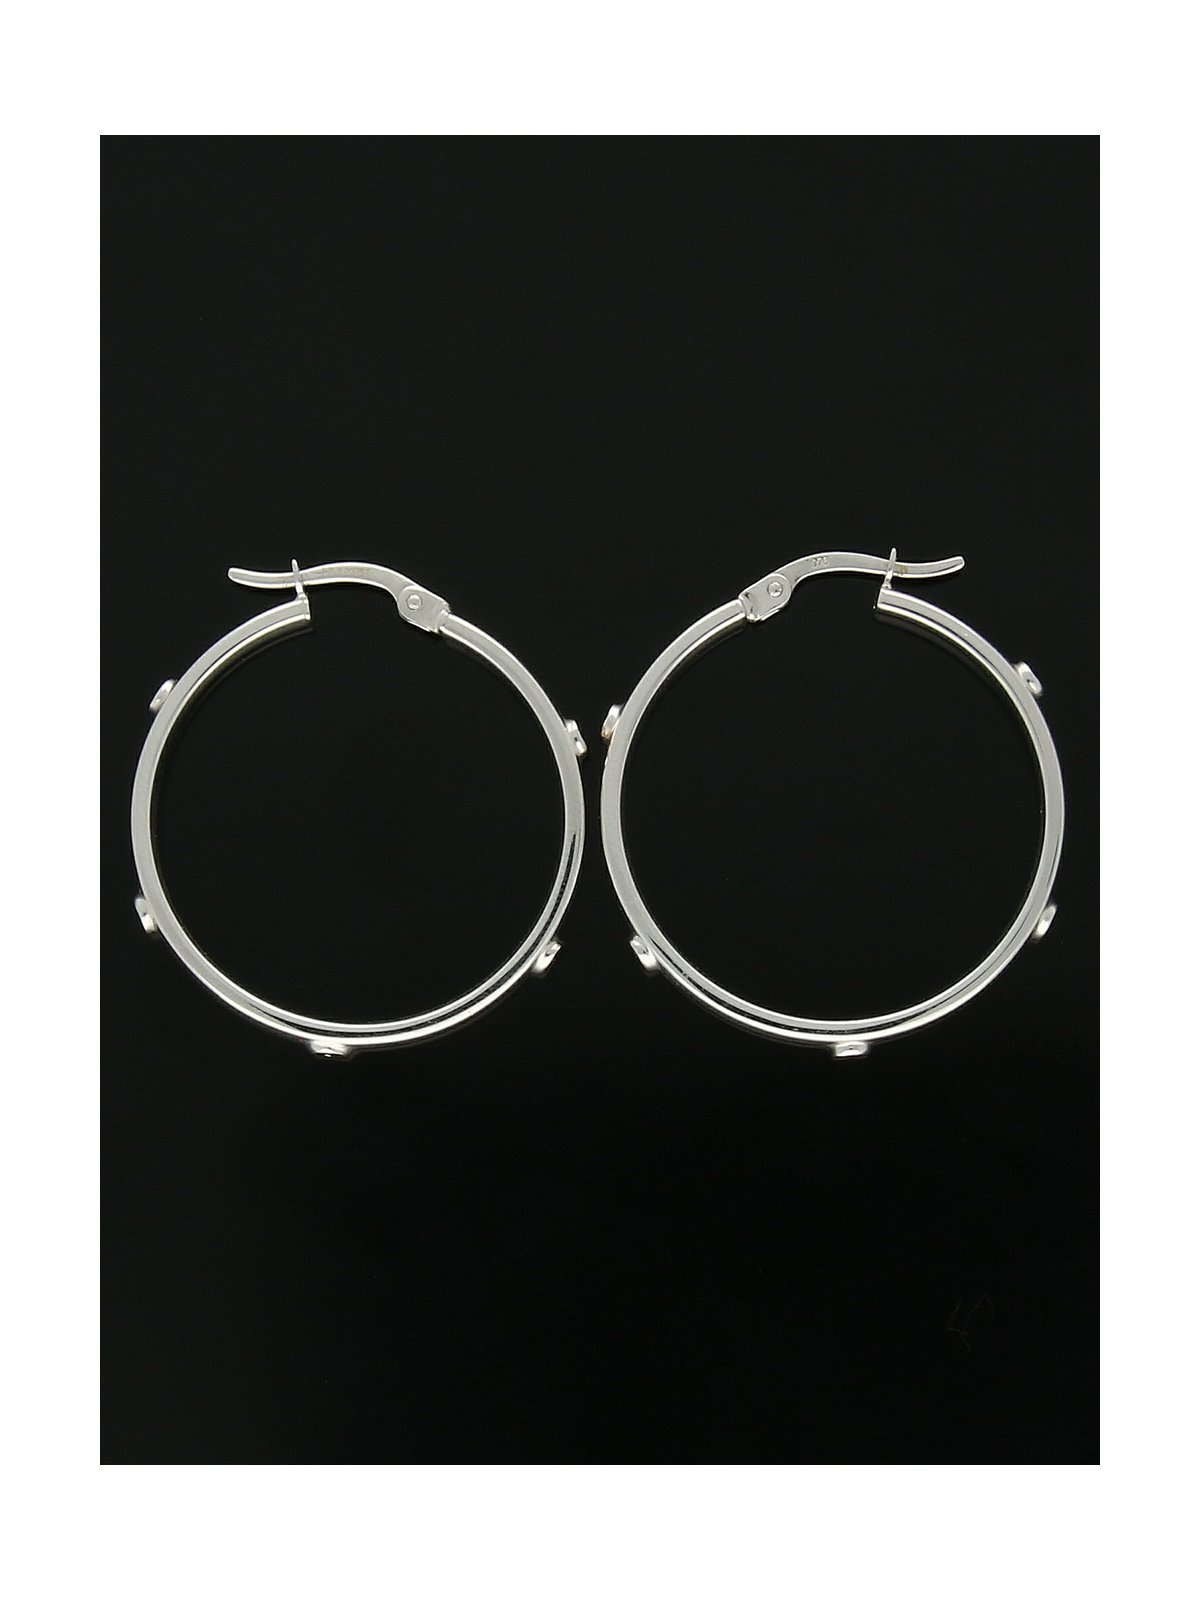 Hoop Earrings with Yellow Gold Screws 28mm in 9ct White Gold